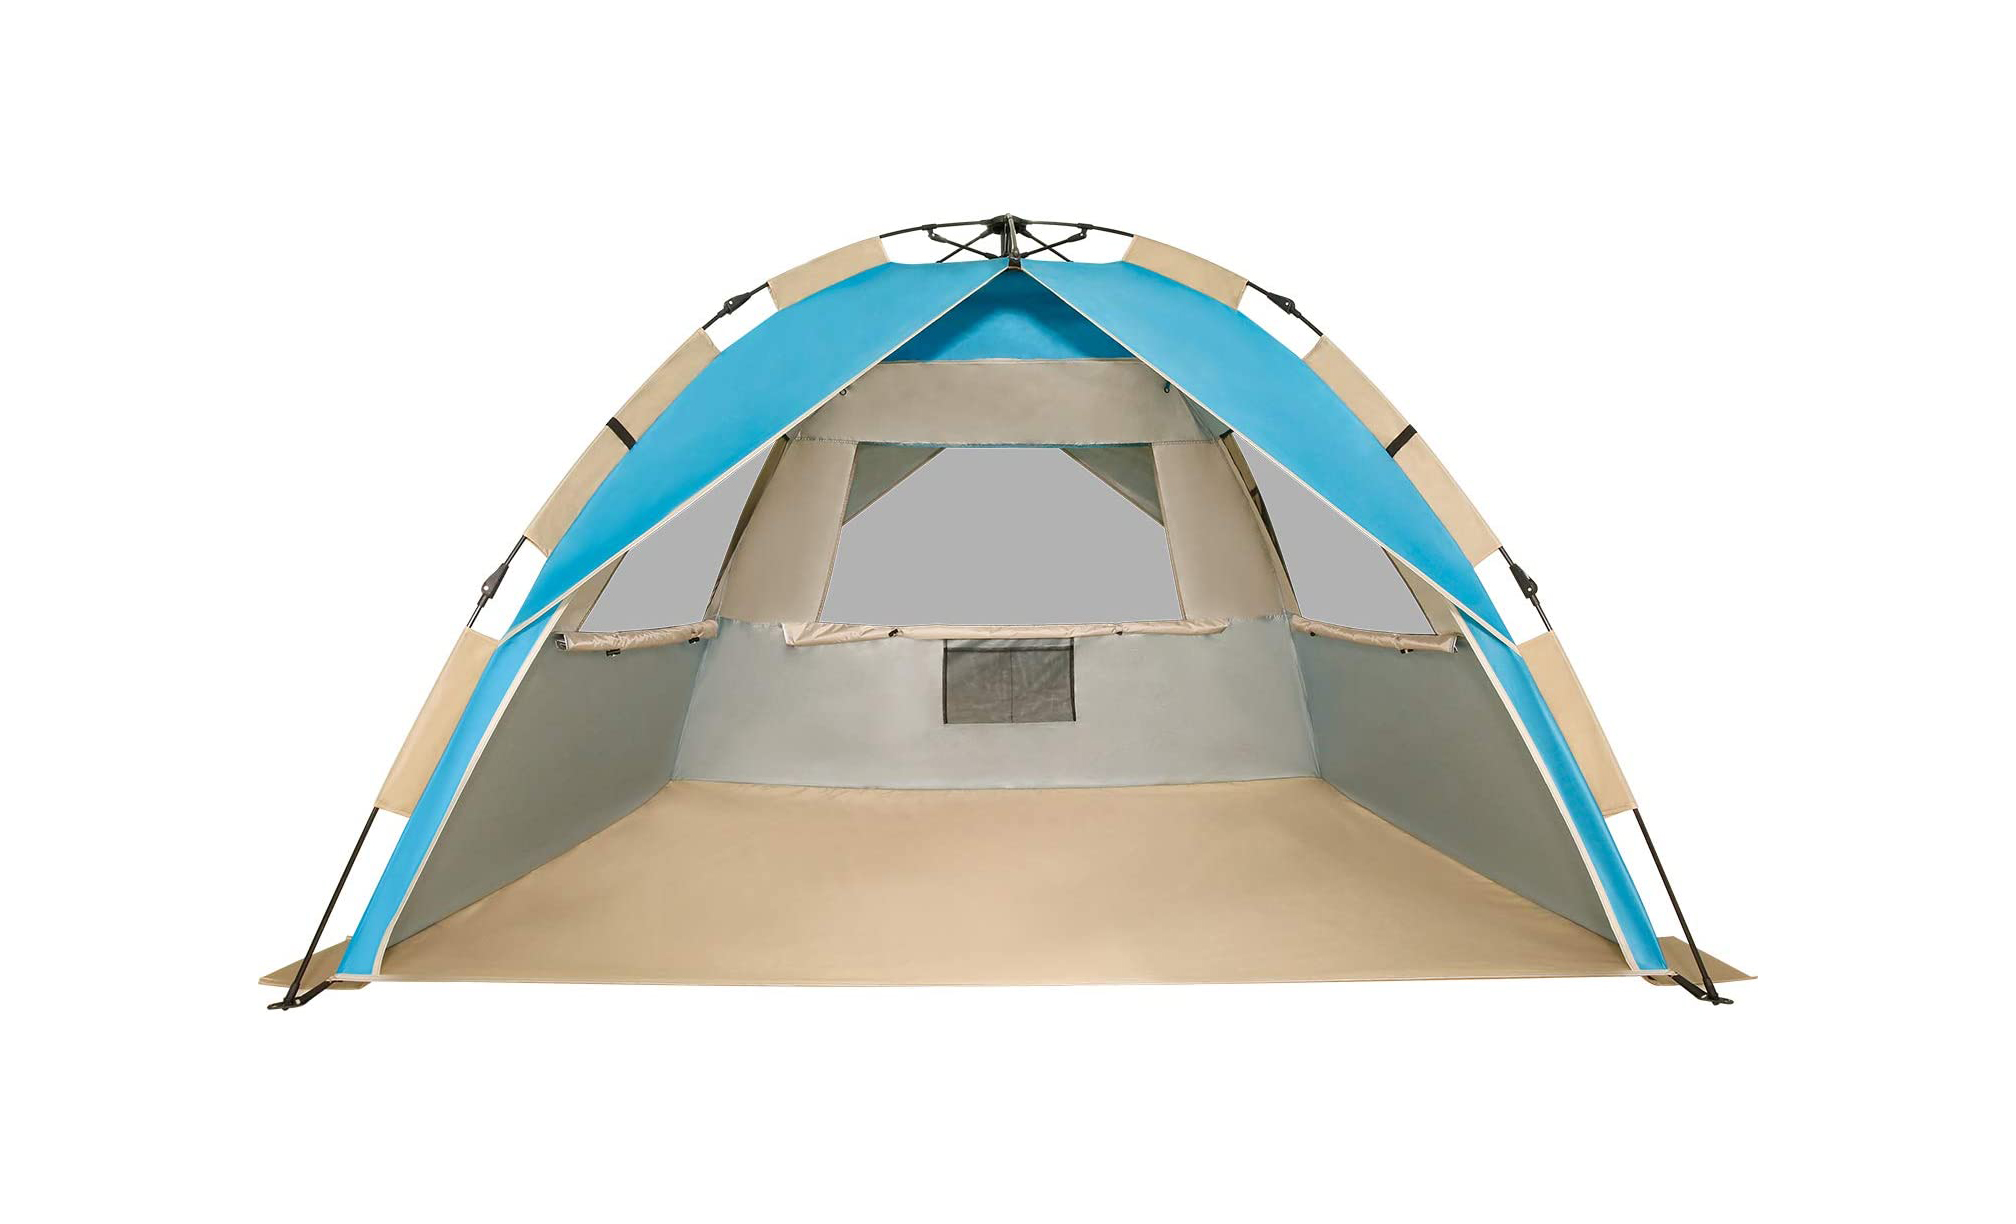 15 Best Pop Up Beach Tents: Compare & Save (2022) | Heavy.com